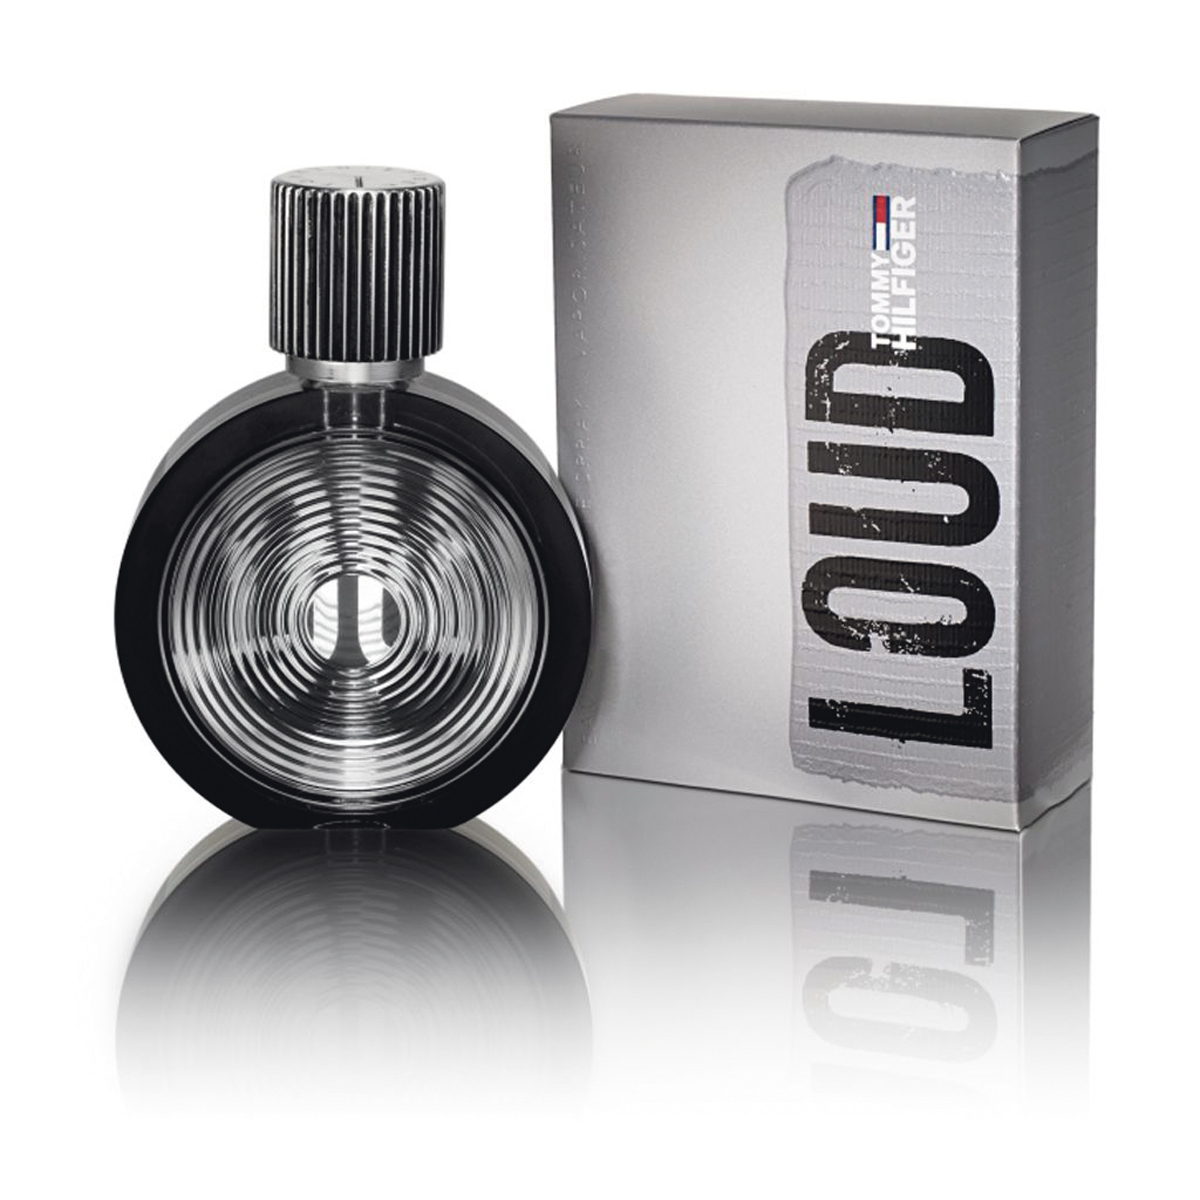 Loud for Him Tommy Hilfiger cologne - a 